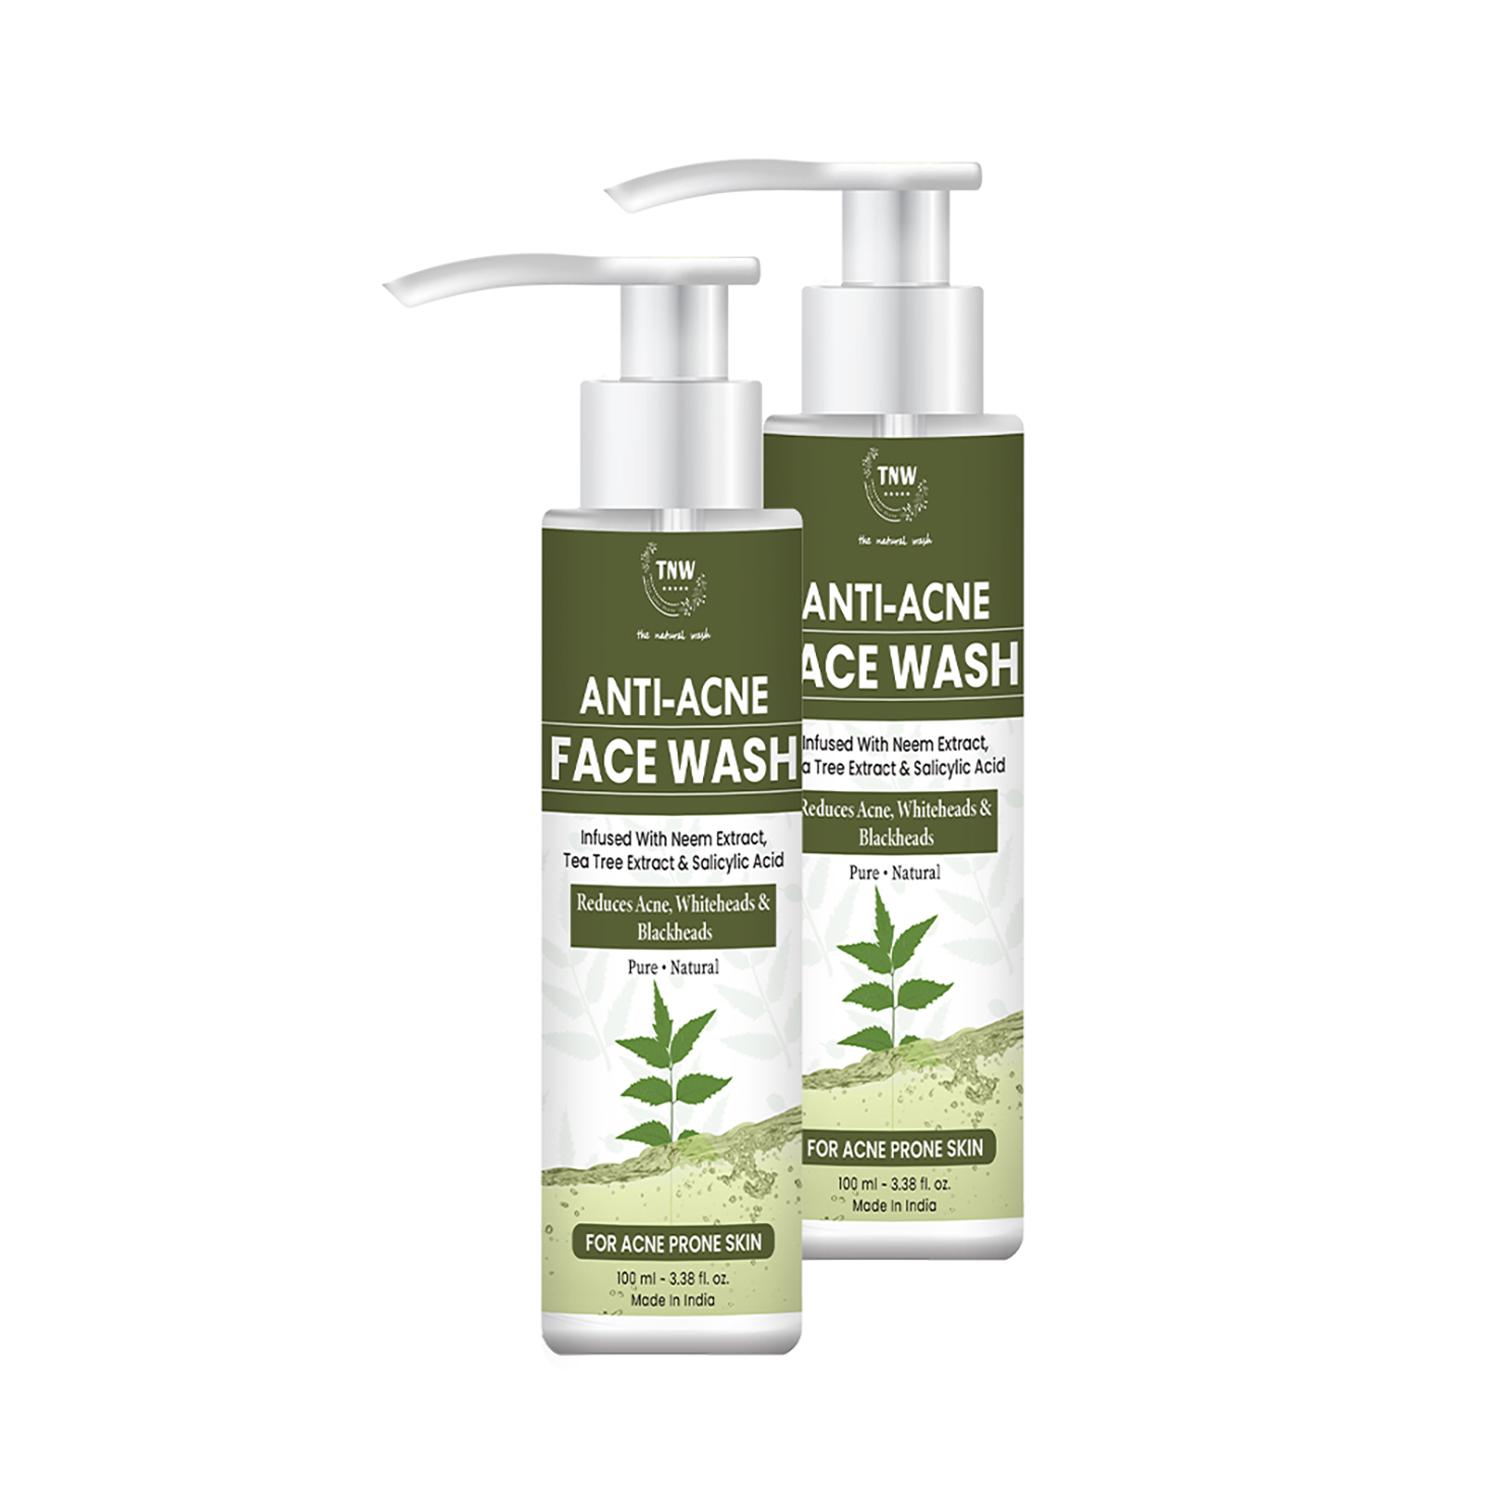 TNW The Natural Wash | TNW - The Natural Wash Anti Acne Face Wash Pack of 2 Combo